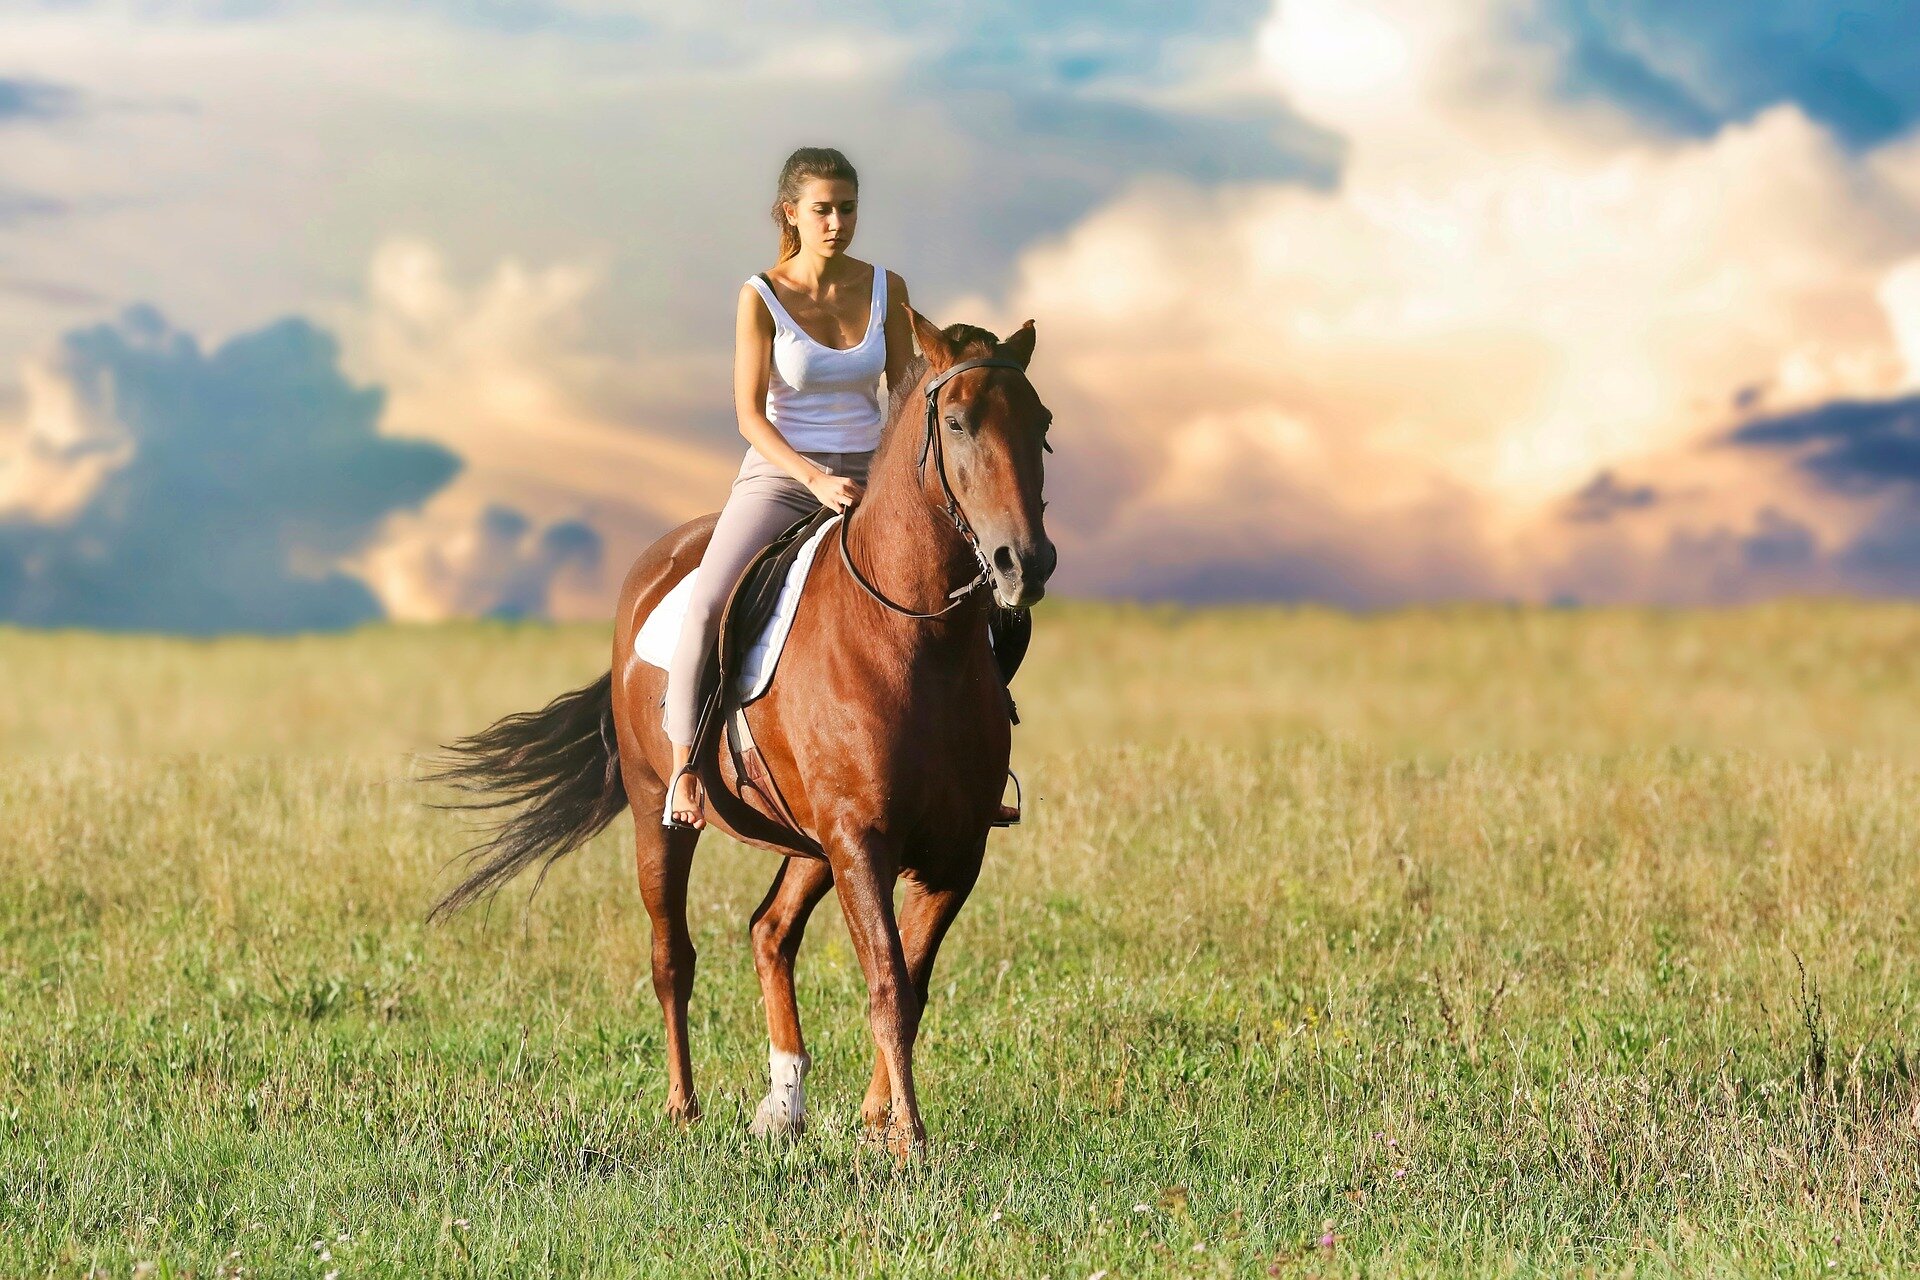 Rise of women in endurance riding